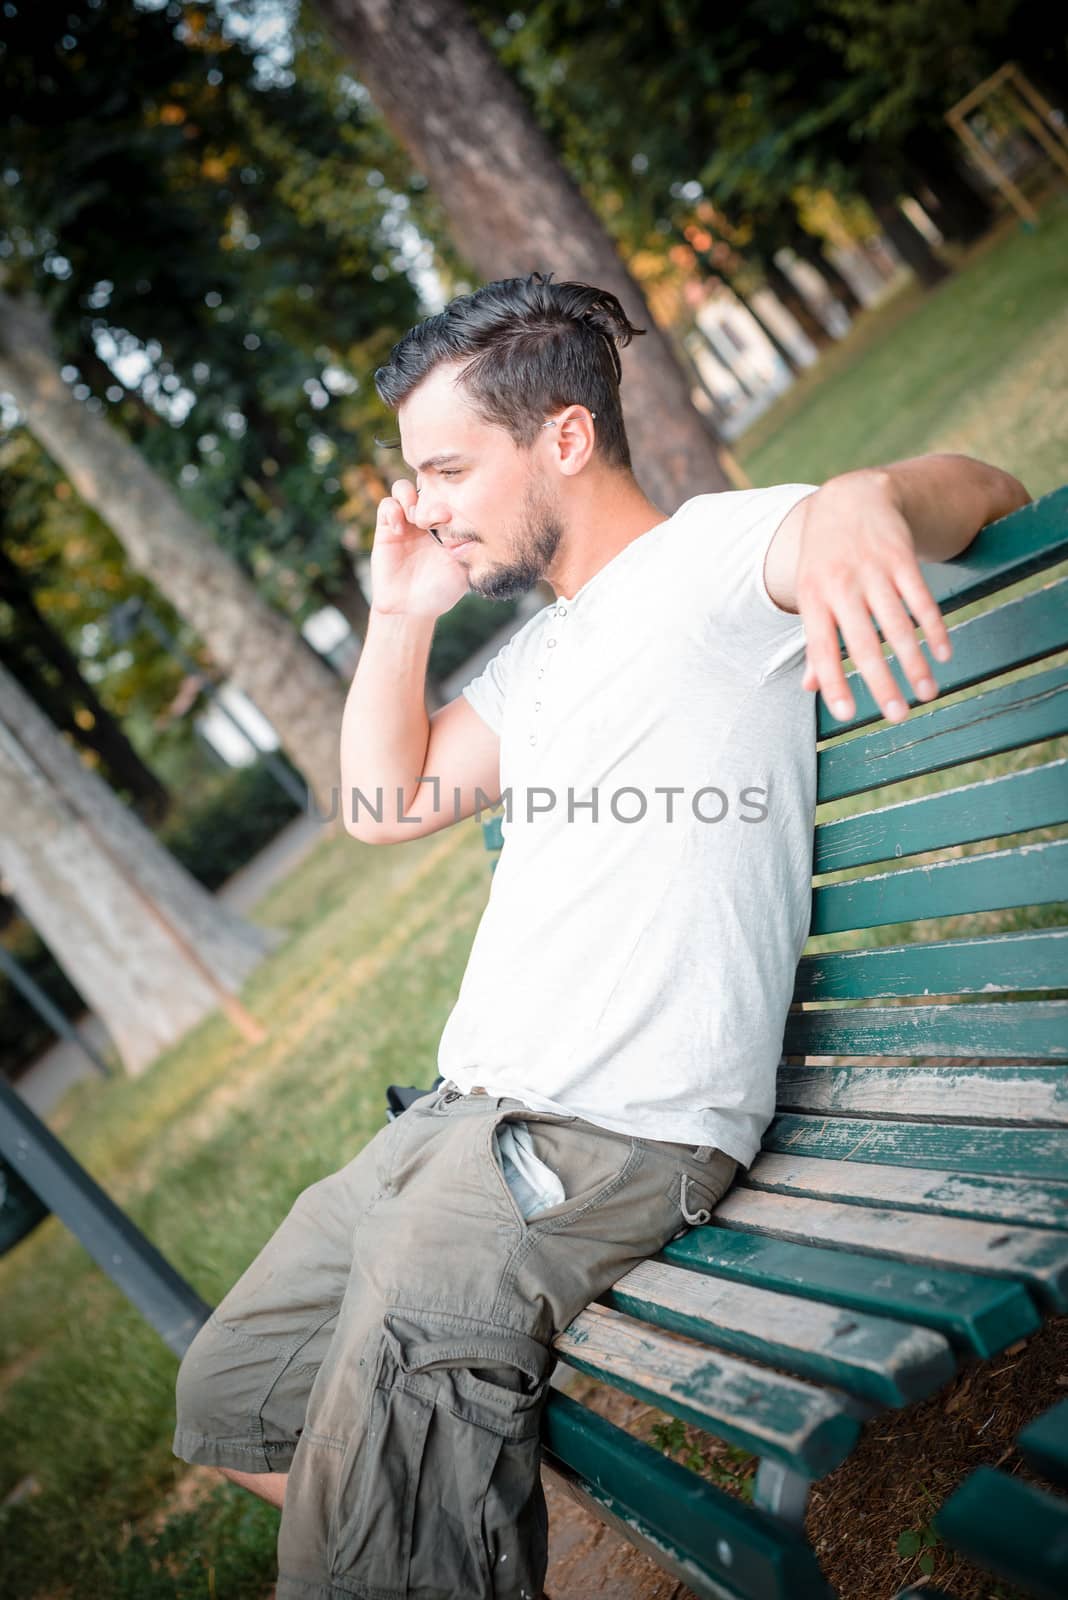 stylish man on the phone at the park